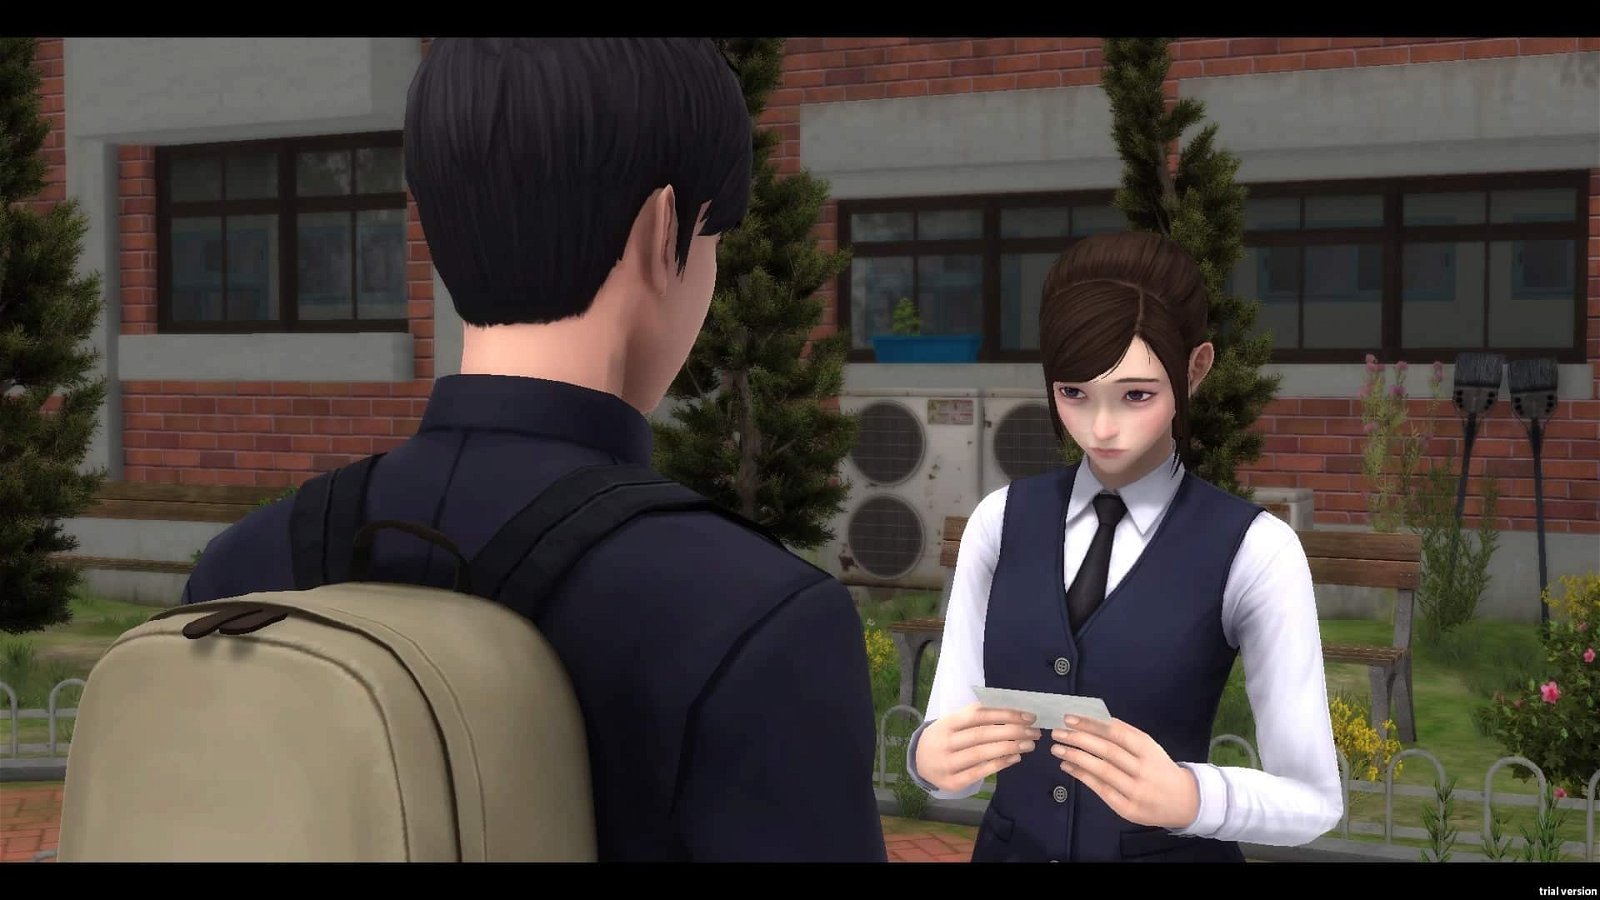 White Day: A Labyrinth Named School, White Day A Labyrinth Named School, PlayStation 5, PS5, Switch, Nintendo Switch, US, North America, Europe, gameplay, features, release date, price, trailer, PQube, Sonorri